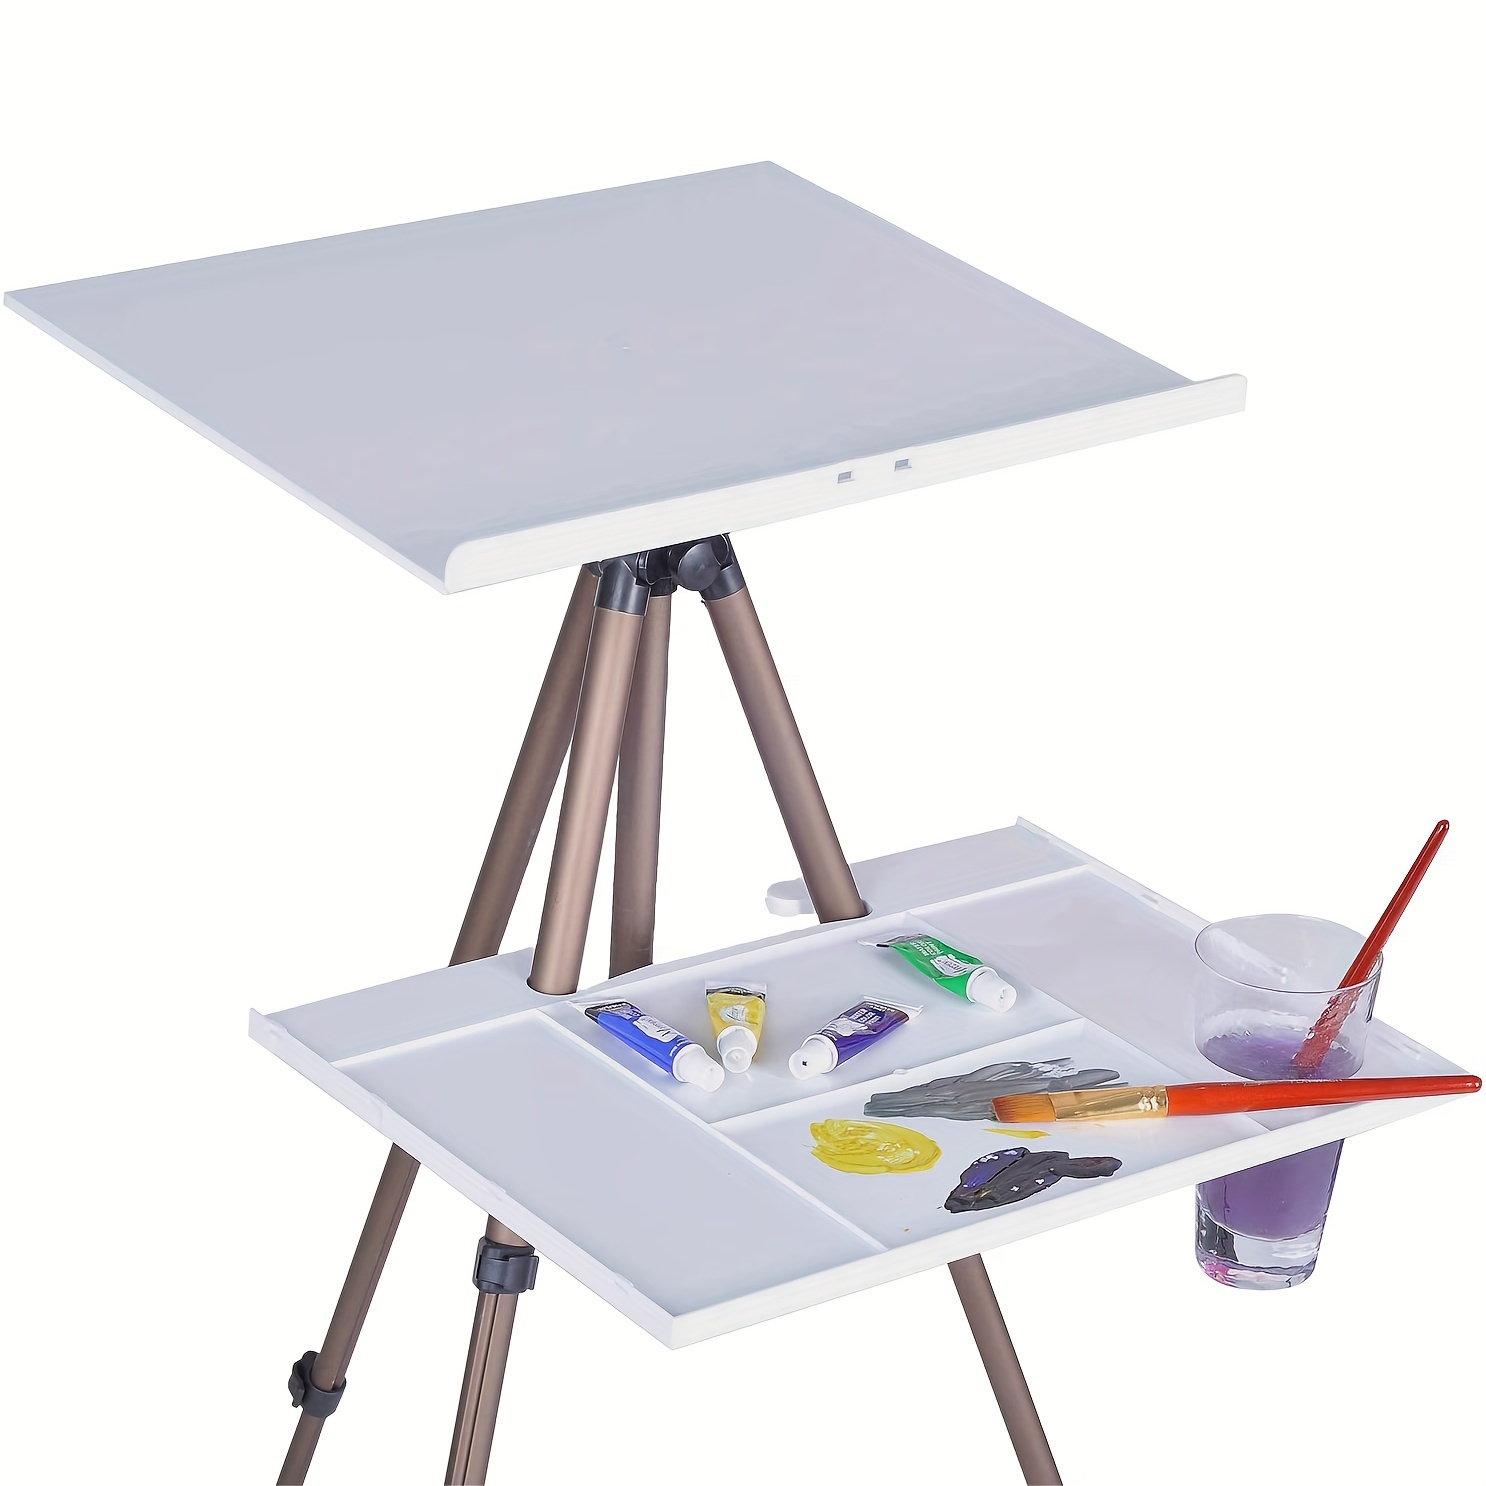 MEEDEN Art Set with French Easel for Professional Artist,Supplies